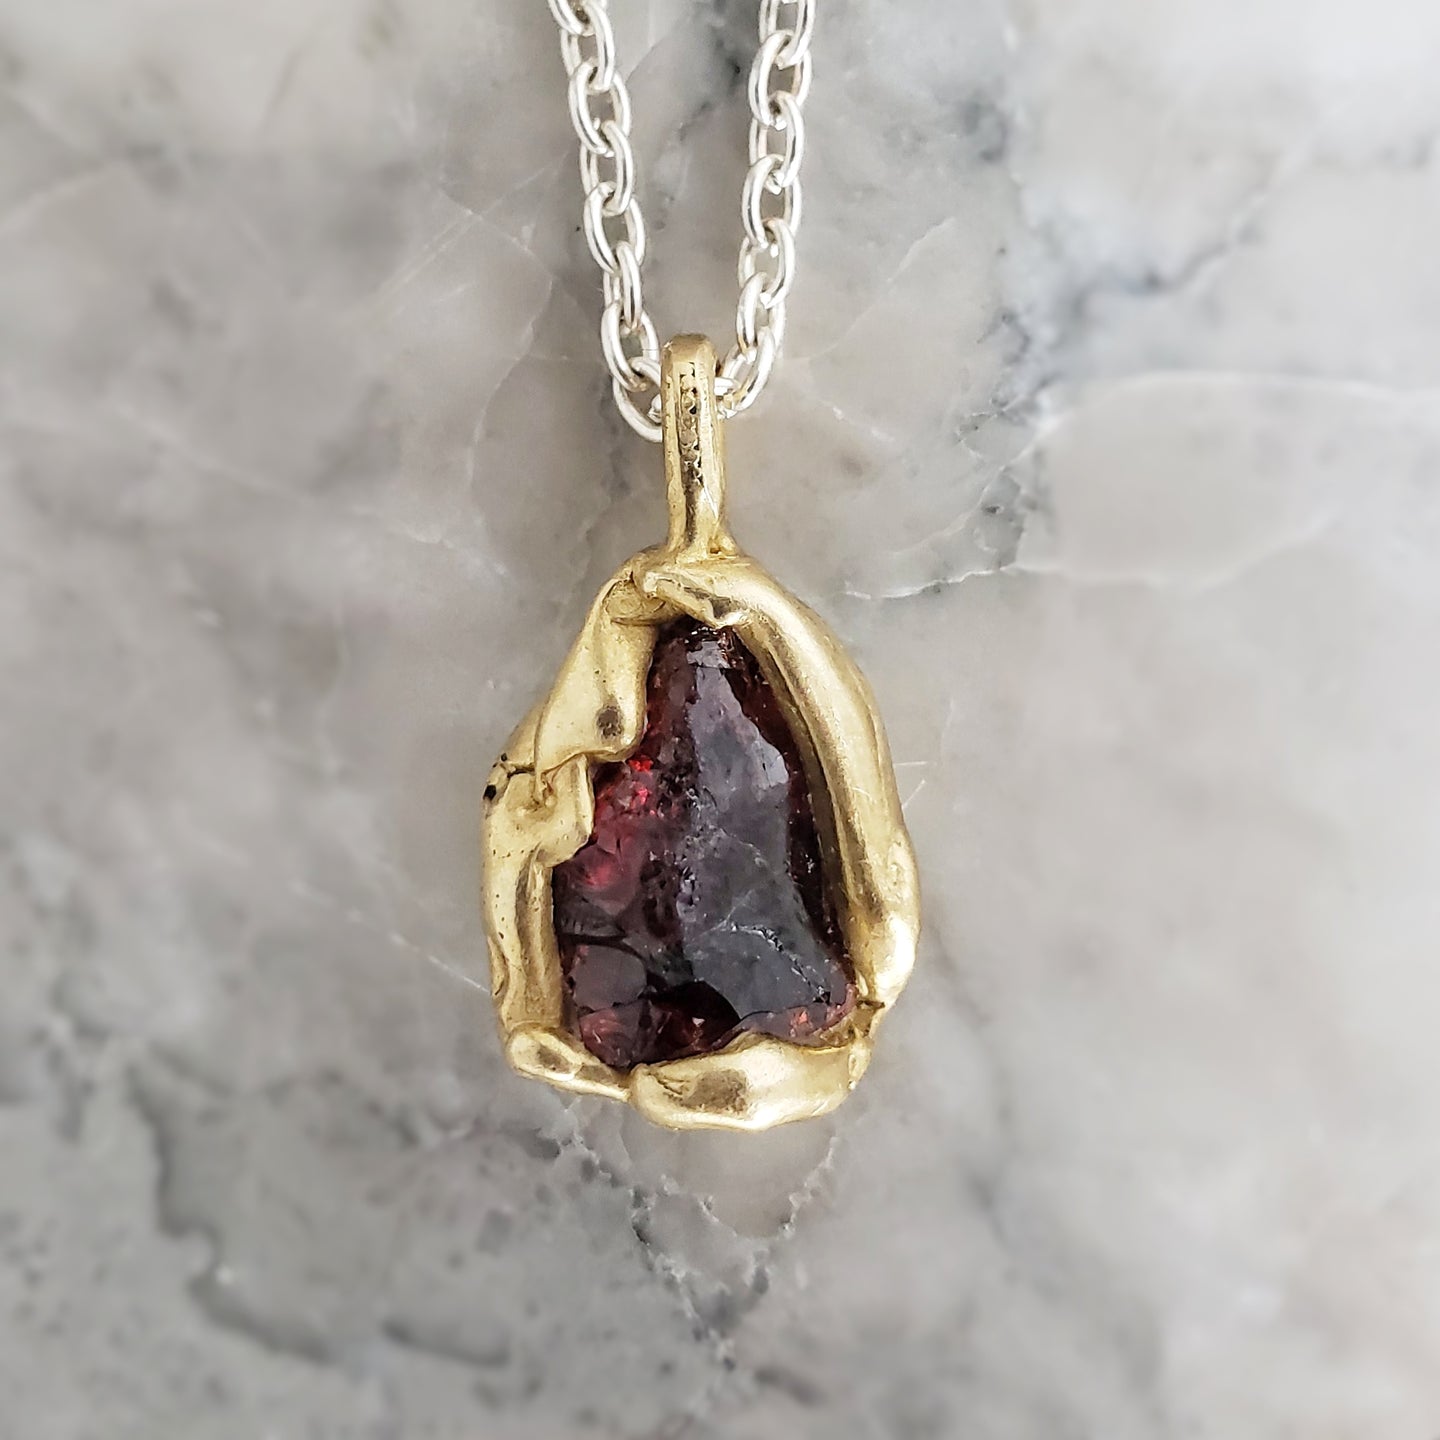 Rough Garnet Necklace in Bronze and Sterling Silver